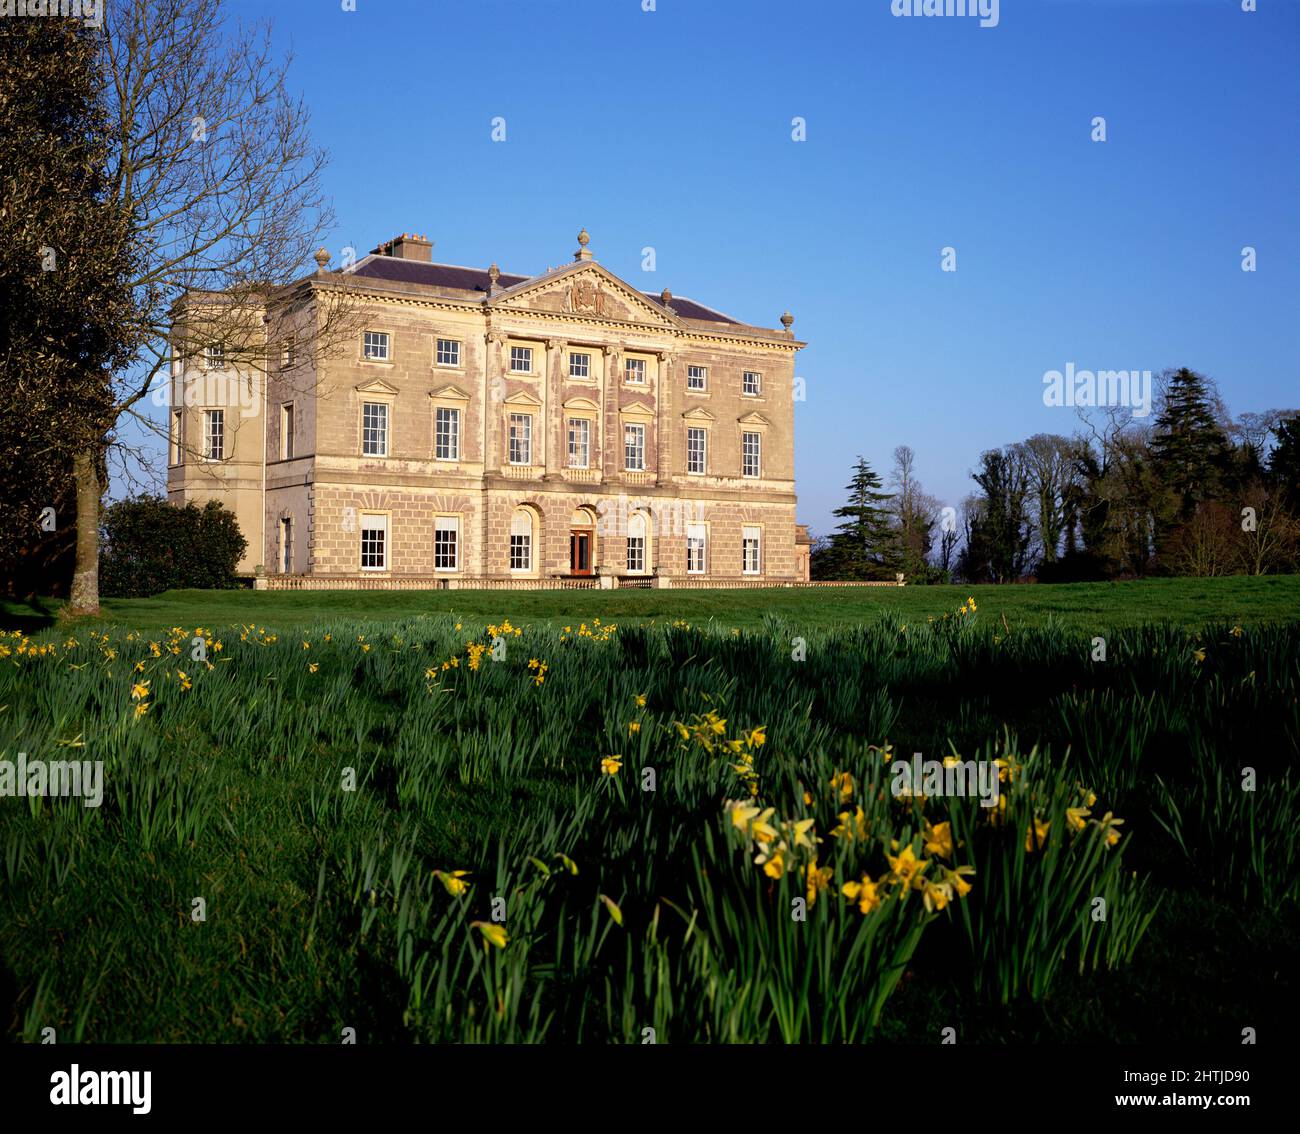 Castle Ward House, Gothic, Palladian, Strangford, County Down, Northern Ireland Stock Photo